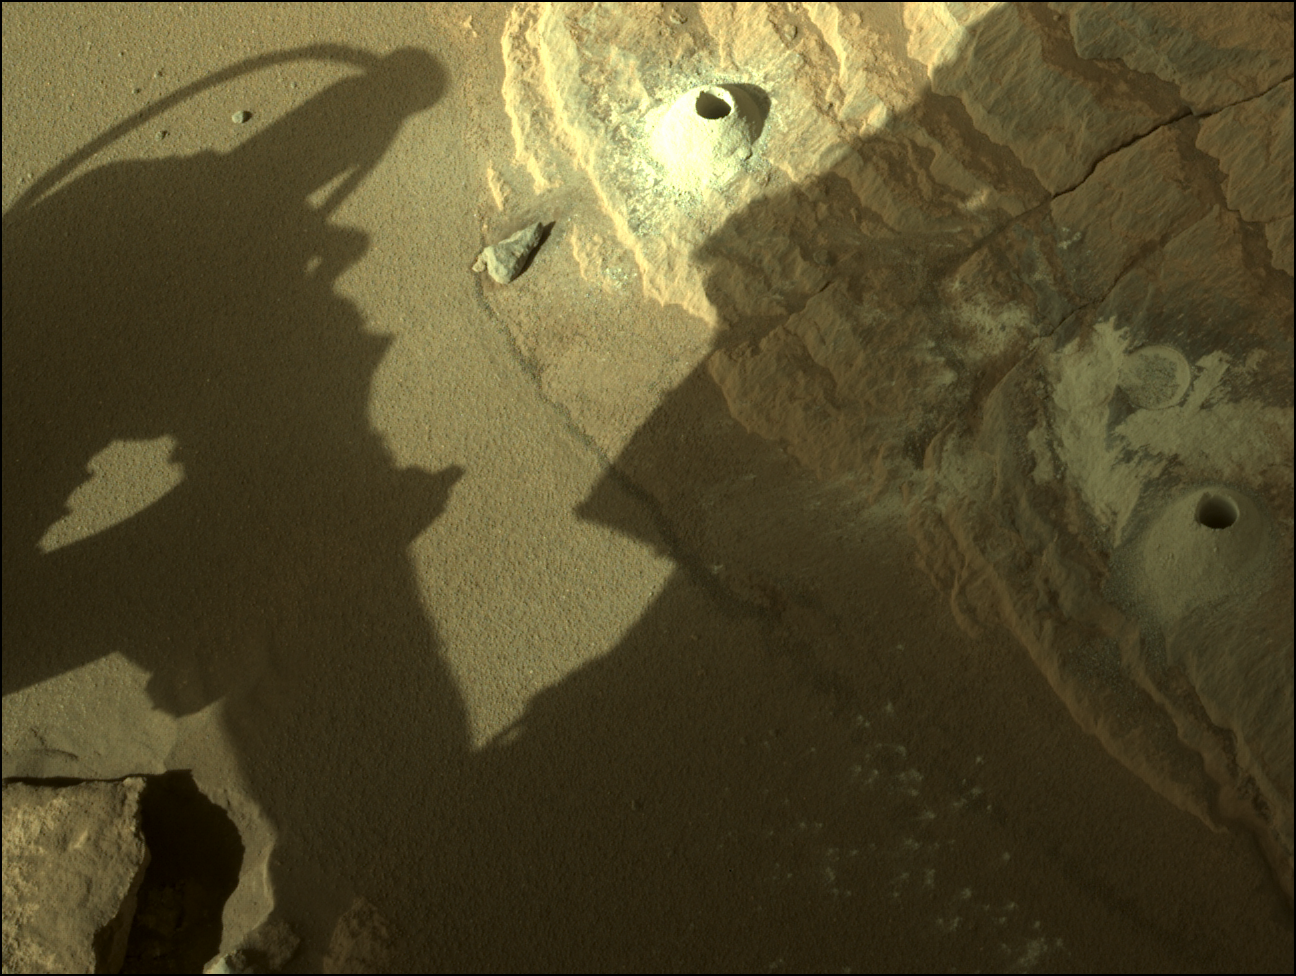 Image taken was taken by the Mars Perseverance rover after collecting the rock sample 5 at Coulettes.